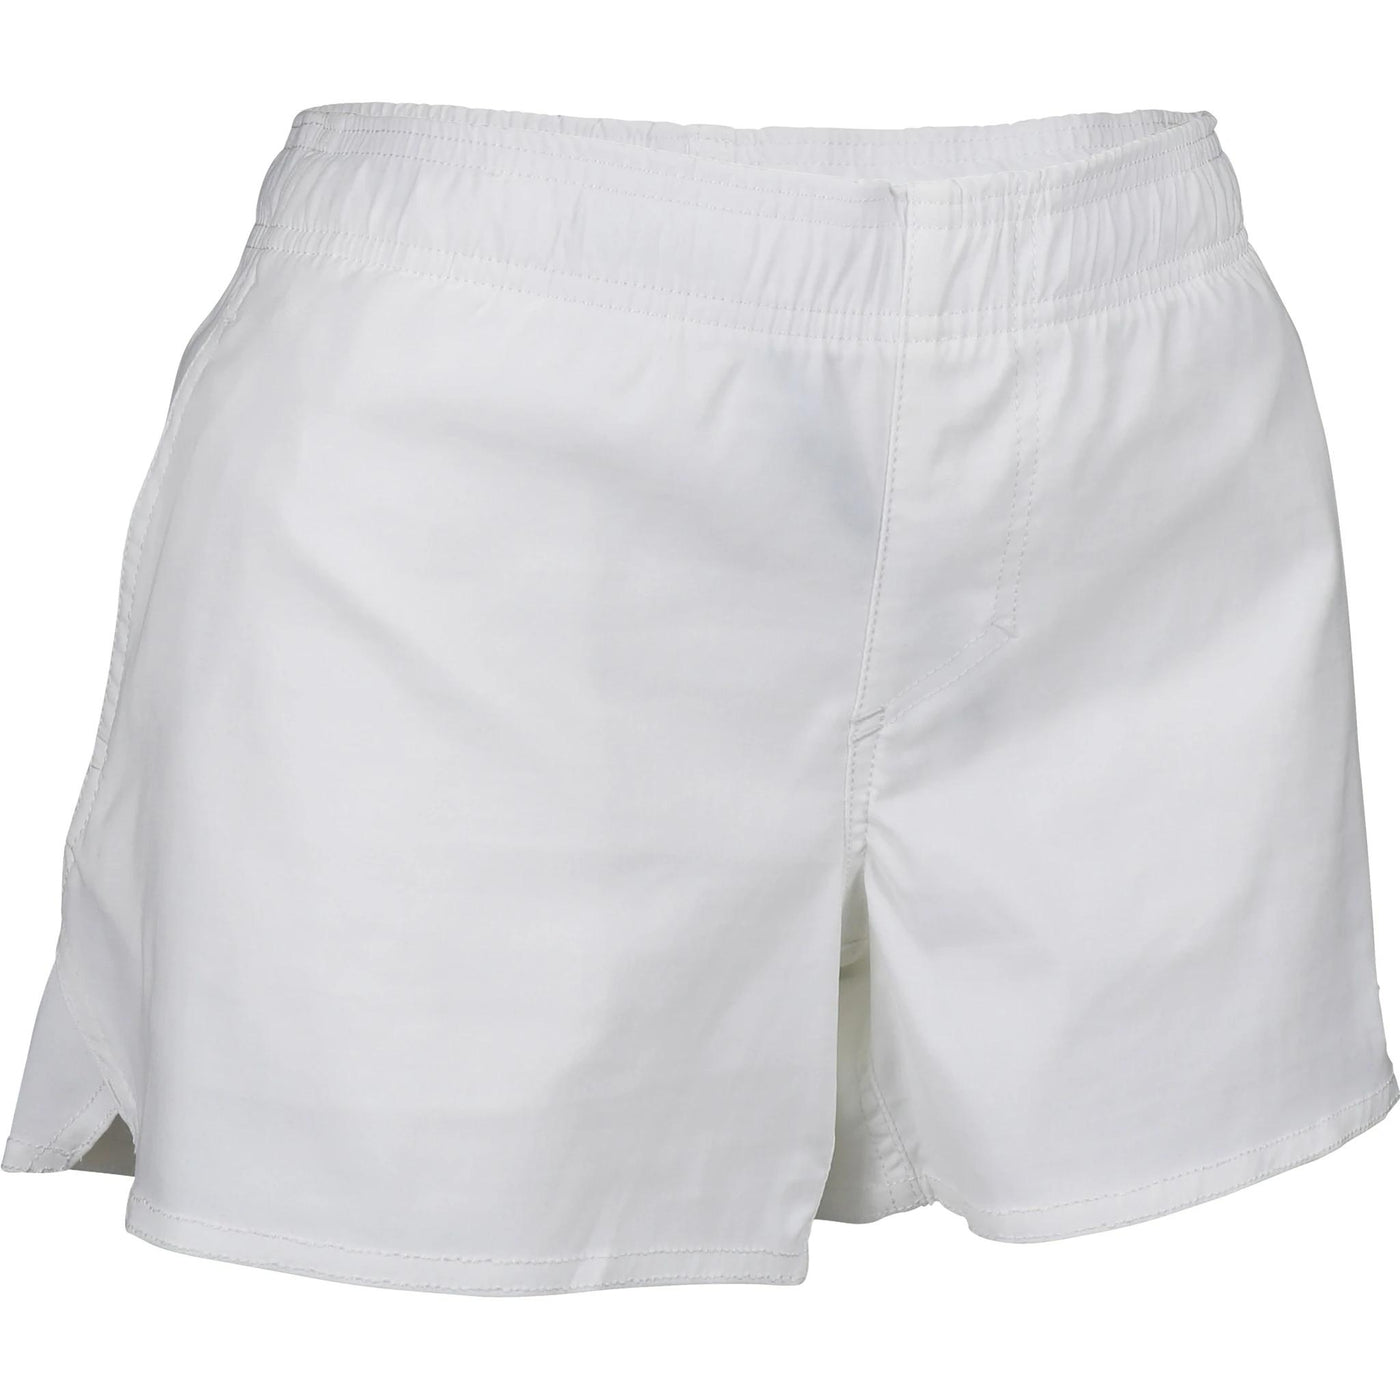 Aftco Women's Hybrid Tech Short-WOMENS CLOTHING-White-2-Kevin's Fine Outdoor Gear & Apparel